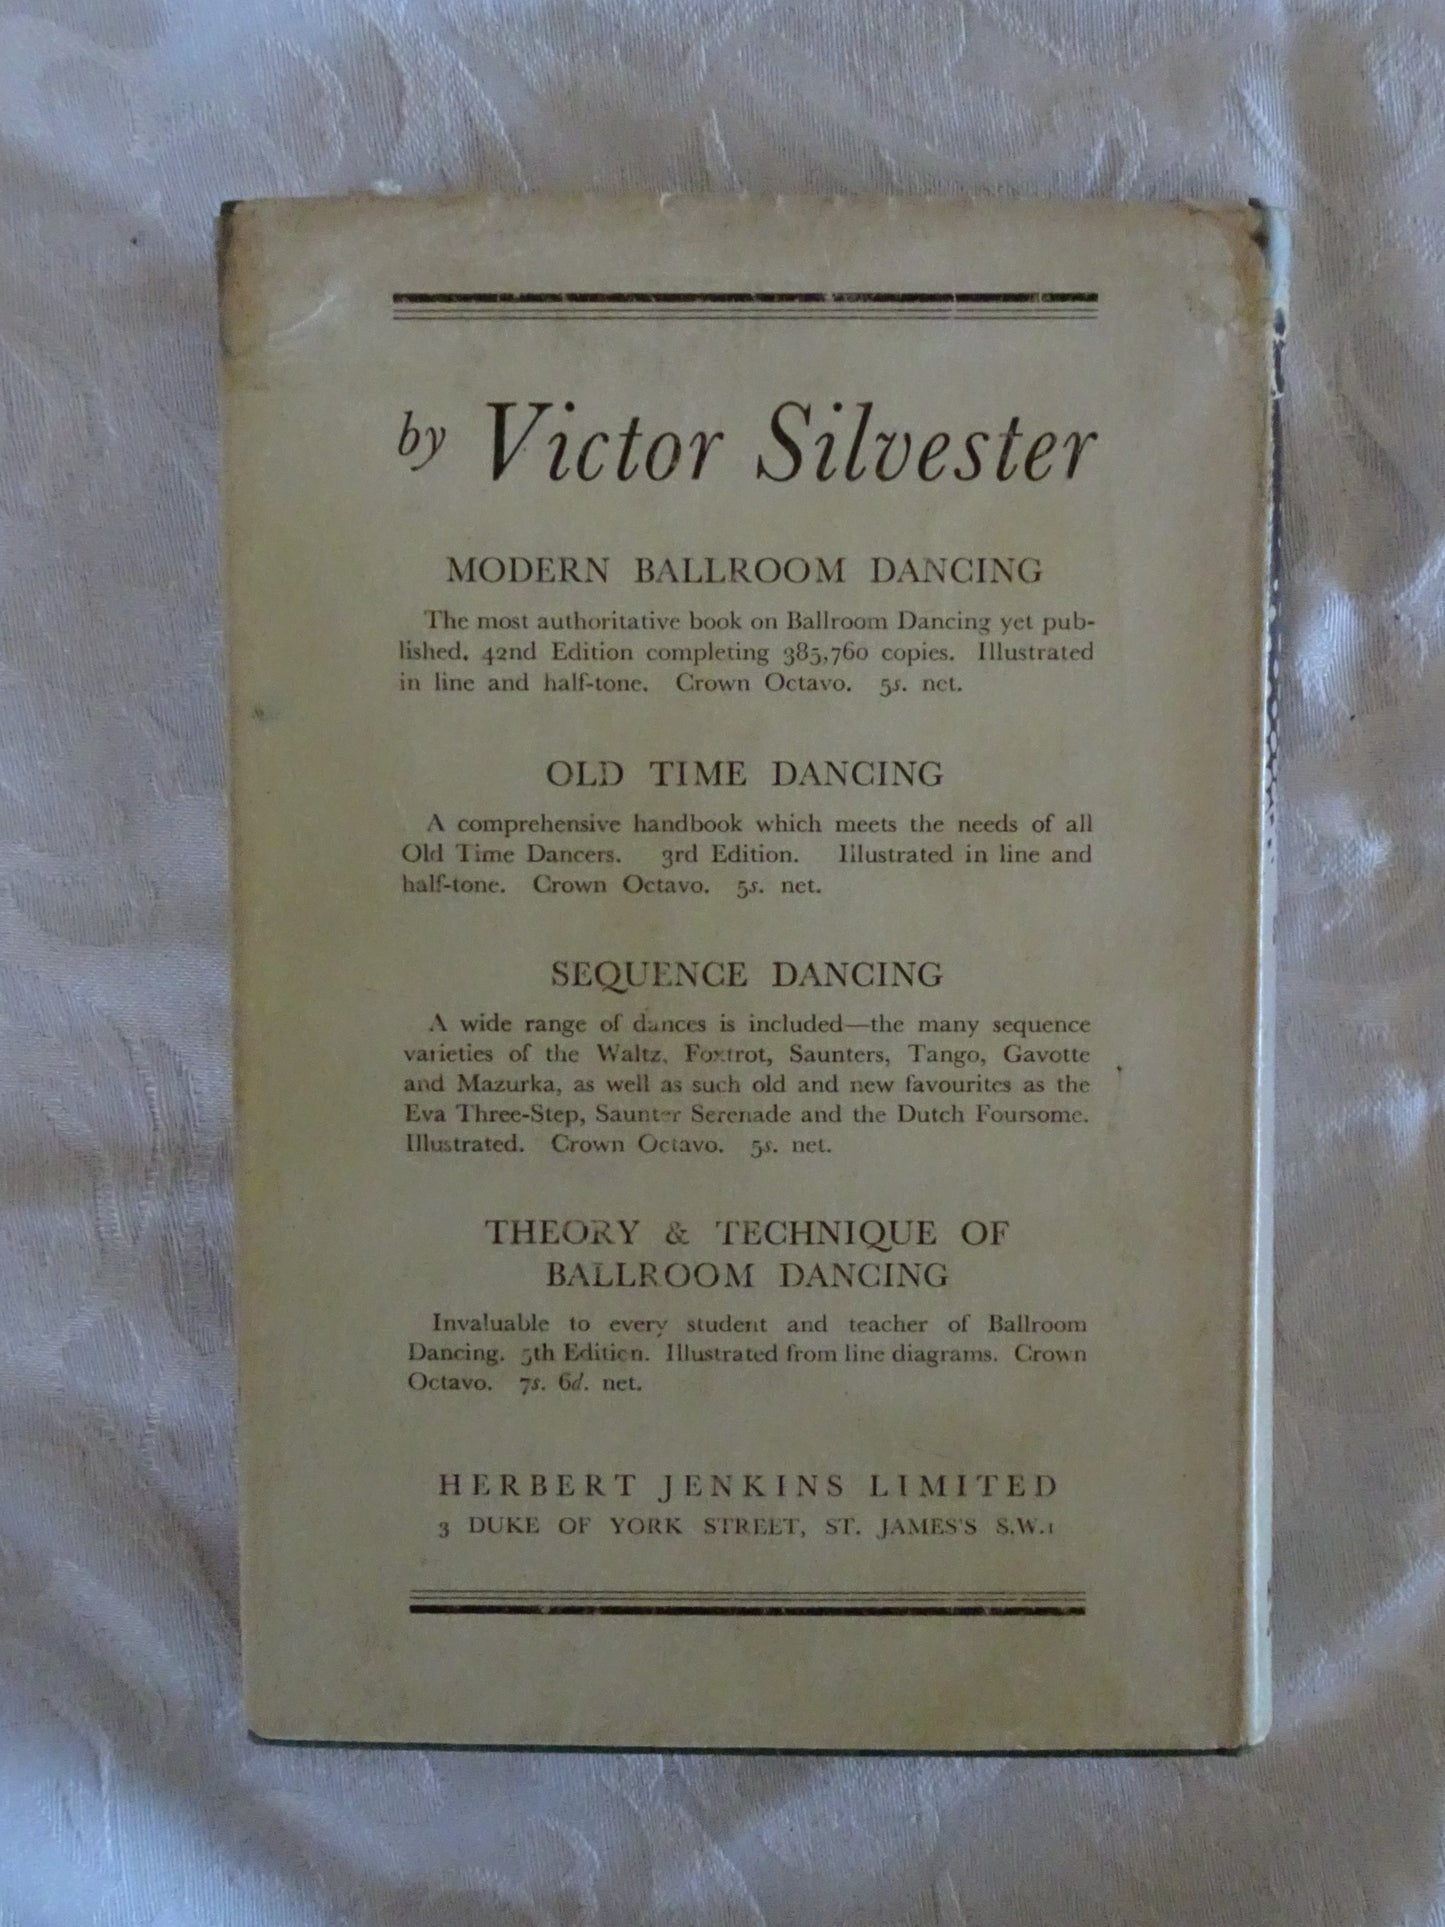 More Old Time Dances by Victor Silvester